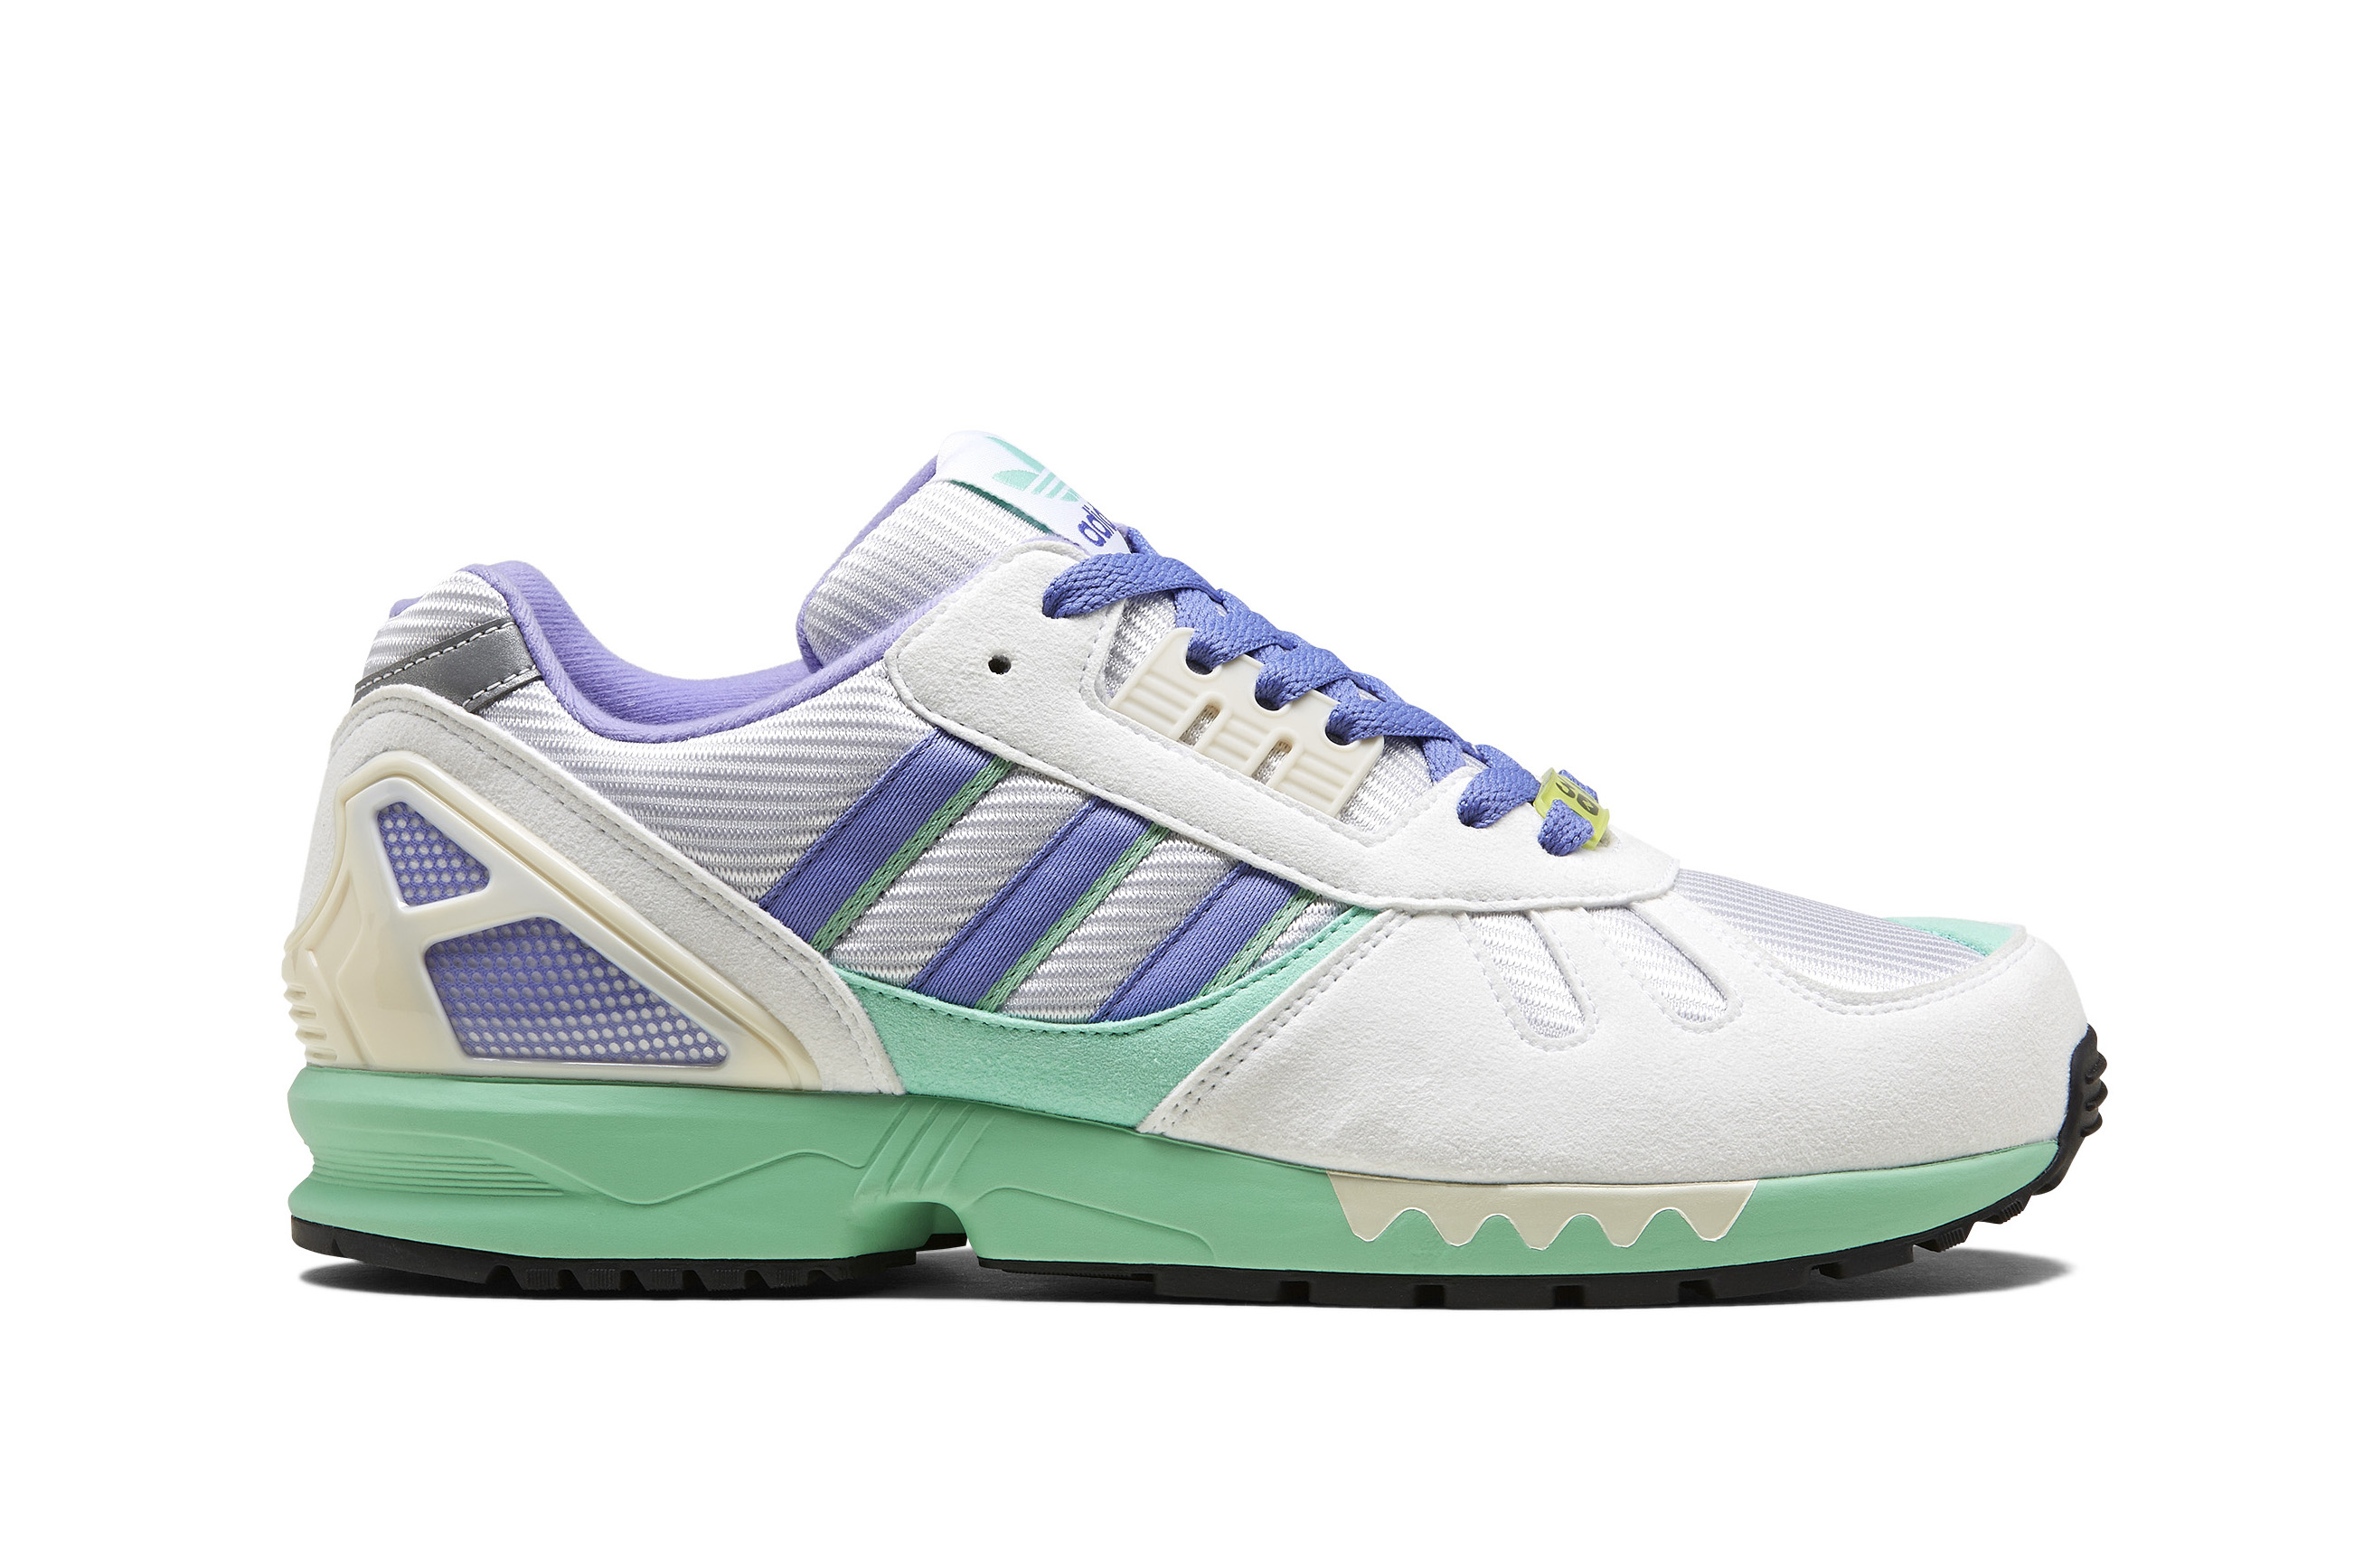 adidas ZX 7000 OG 30 years of Torsion 3